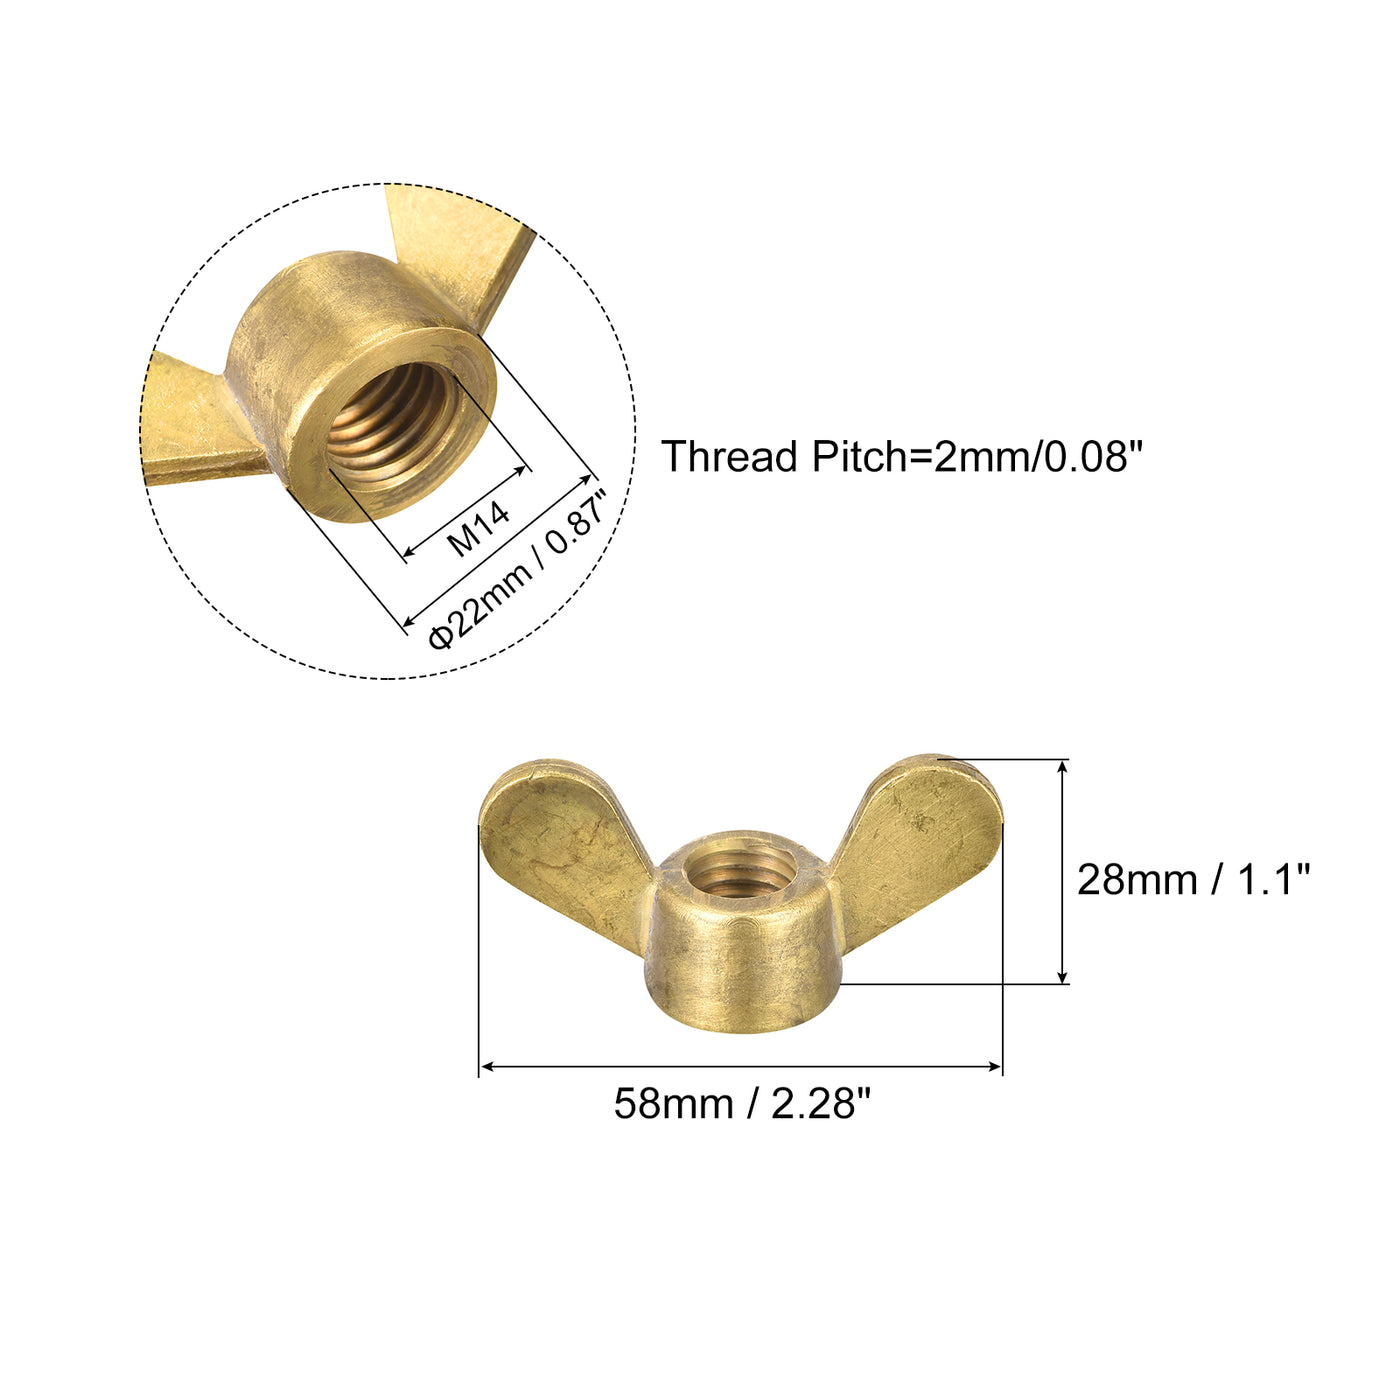 uxcell Uxcell Brass Wing Nuts, M14 Butterfly Nut Hand Twist Tighten Fasteners for Furniture, Machinery, Electronic Equipment, 3Pcs